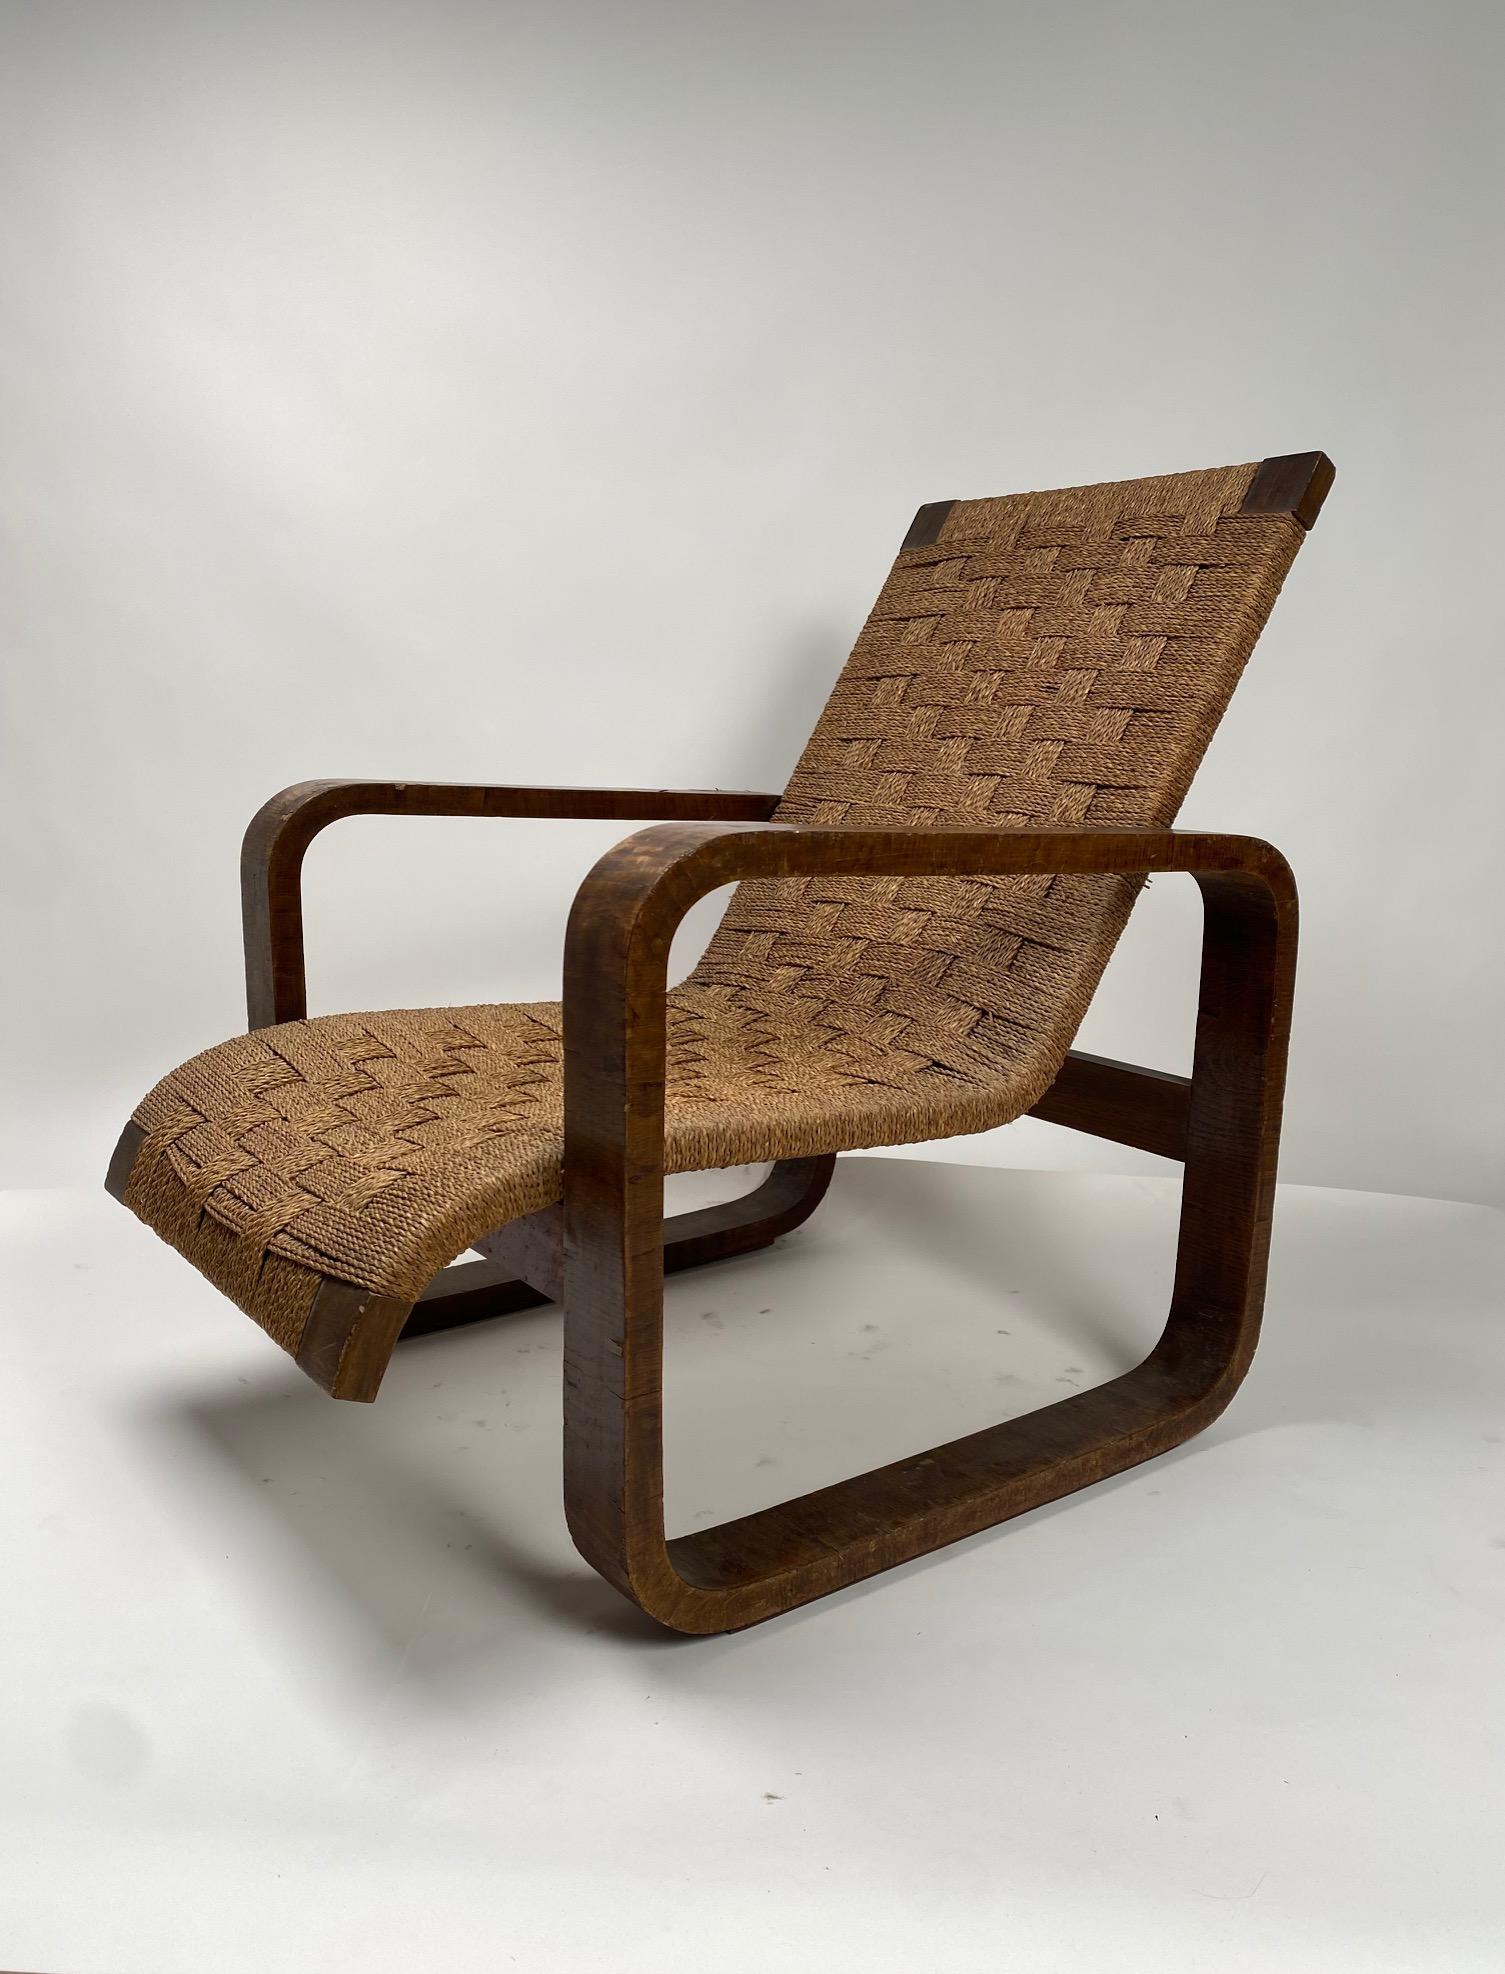 Sophisticated and almost museum-like work, suitable for both collectors and lovers of rare and refined furnishings

Giuseppe Pagano (Attr.), Monumental armchair in wood and rope, Italy, 1940s

It is an unusual sculptural work, characteristic of the